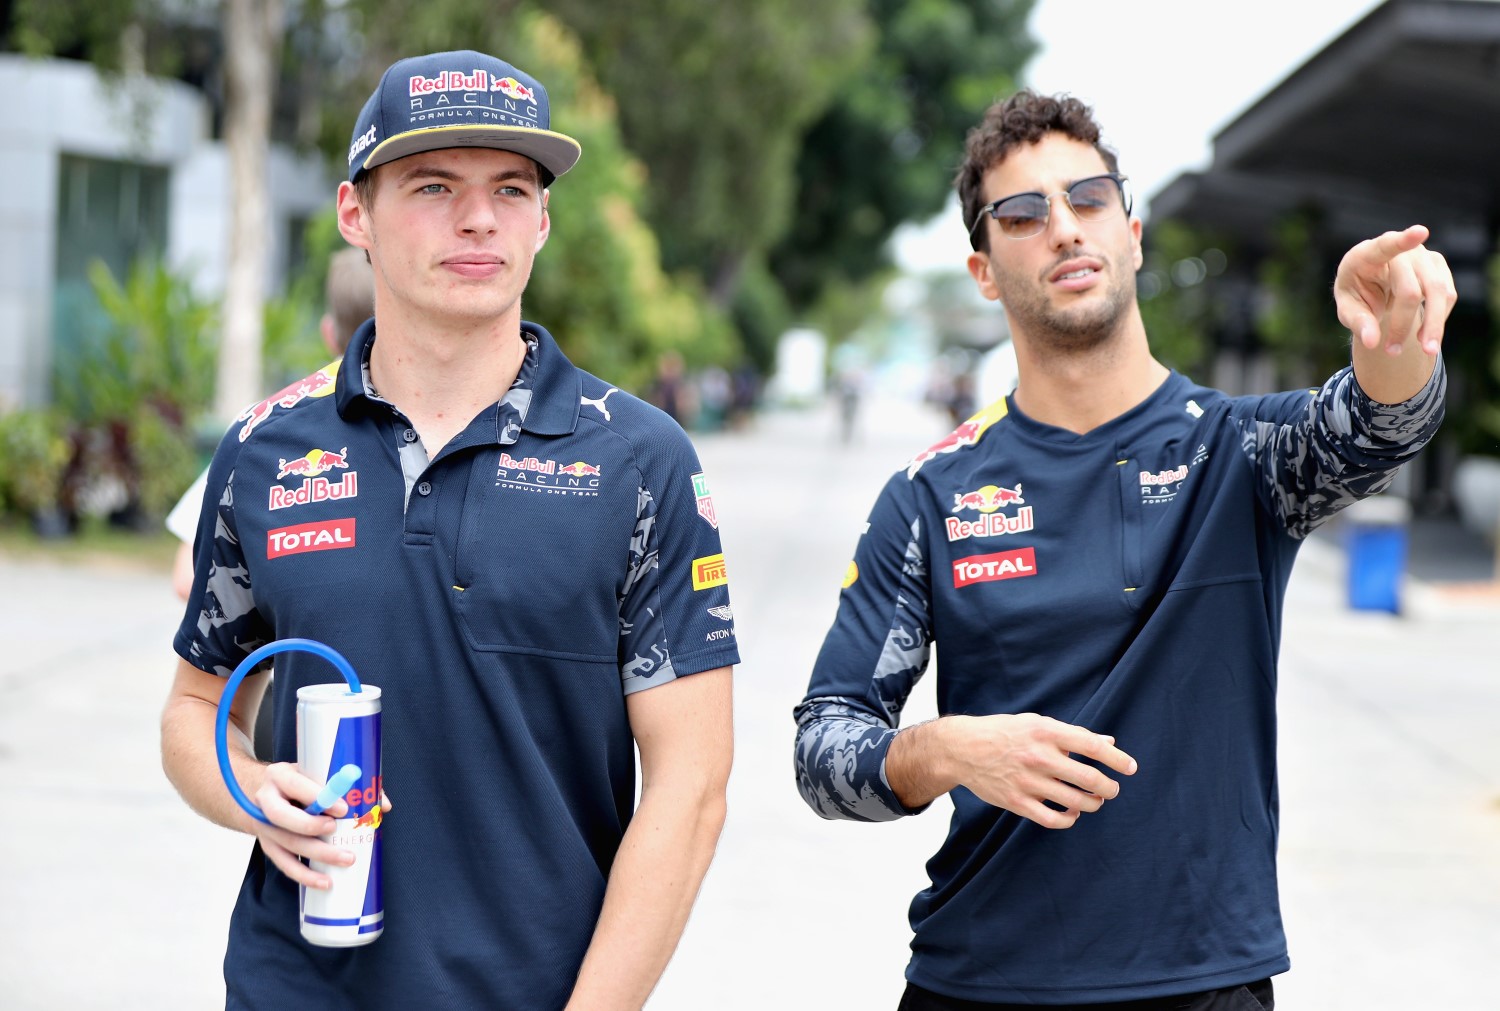 Ricciardo (R) outqualified and out-raced Verstappen (L) but somehow did not win Driver of the Day.